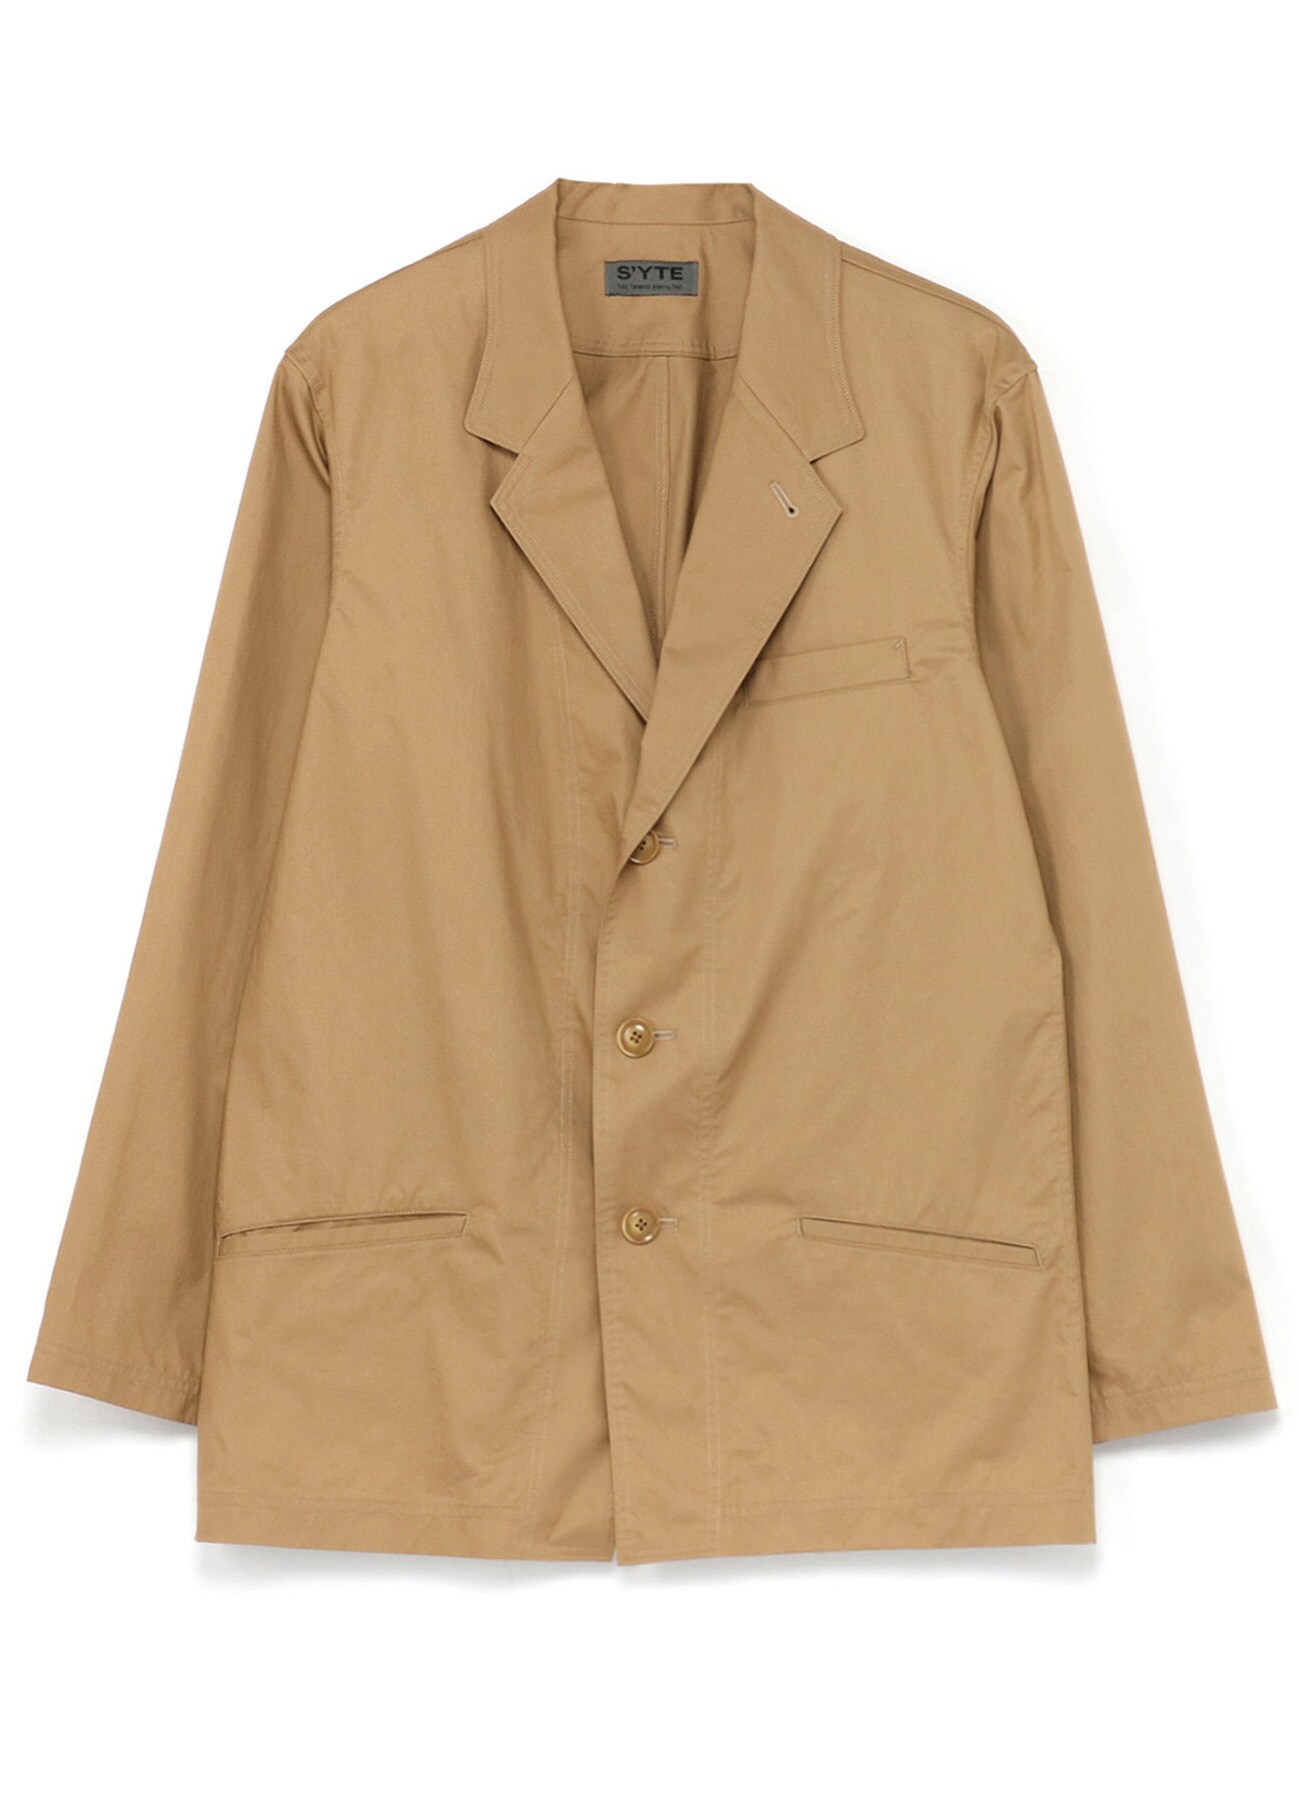 COTTON TWILL 3BS TAILORED SHIRT JACKET(S Beige): S'YTE｜THE SHOP